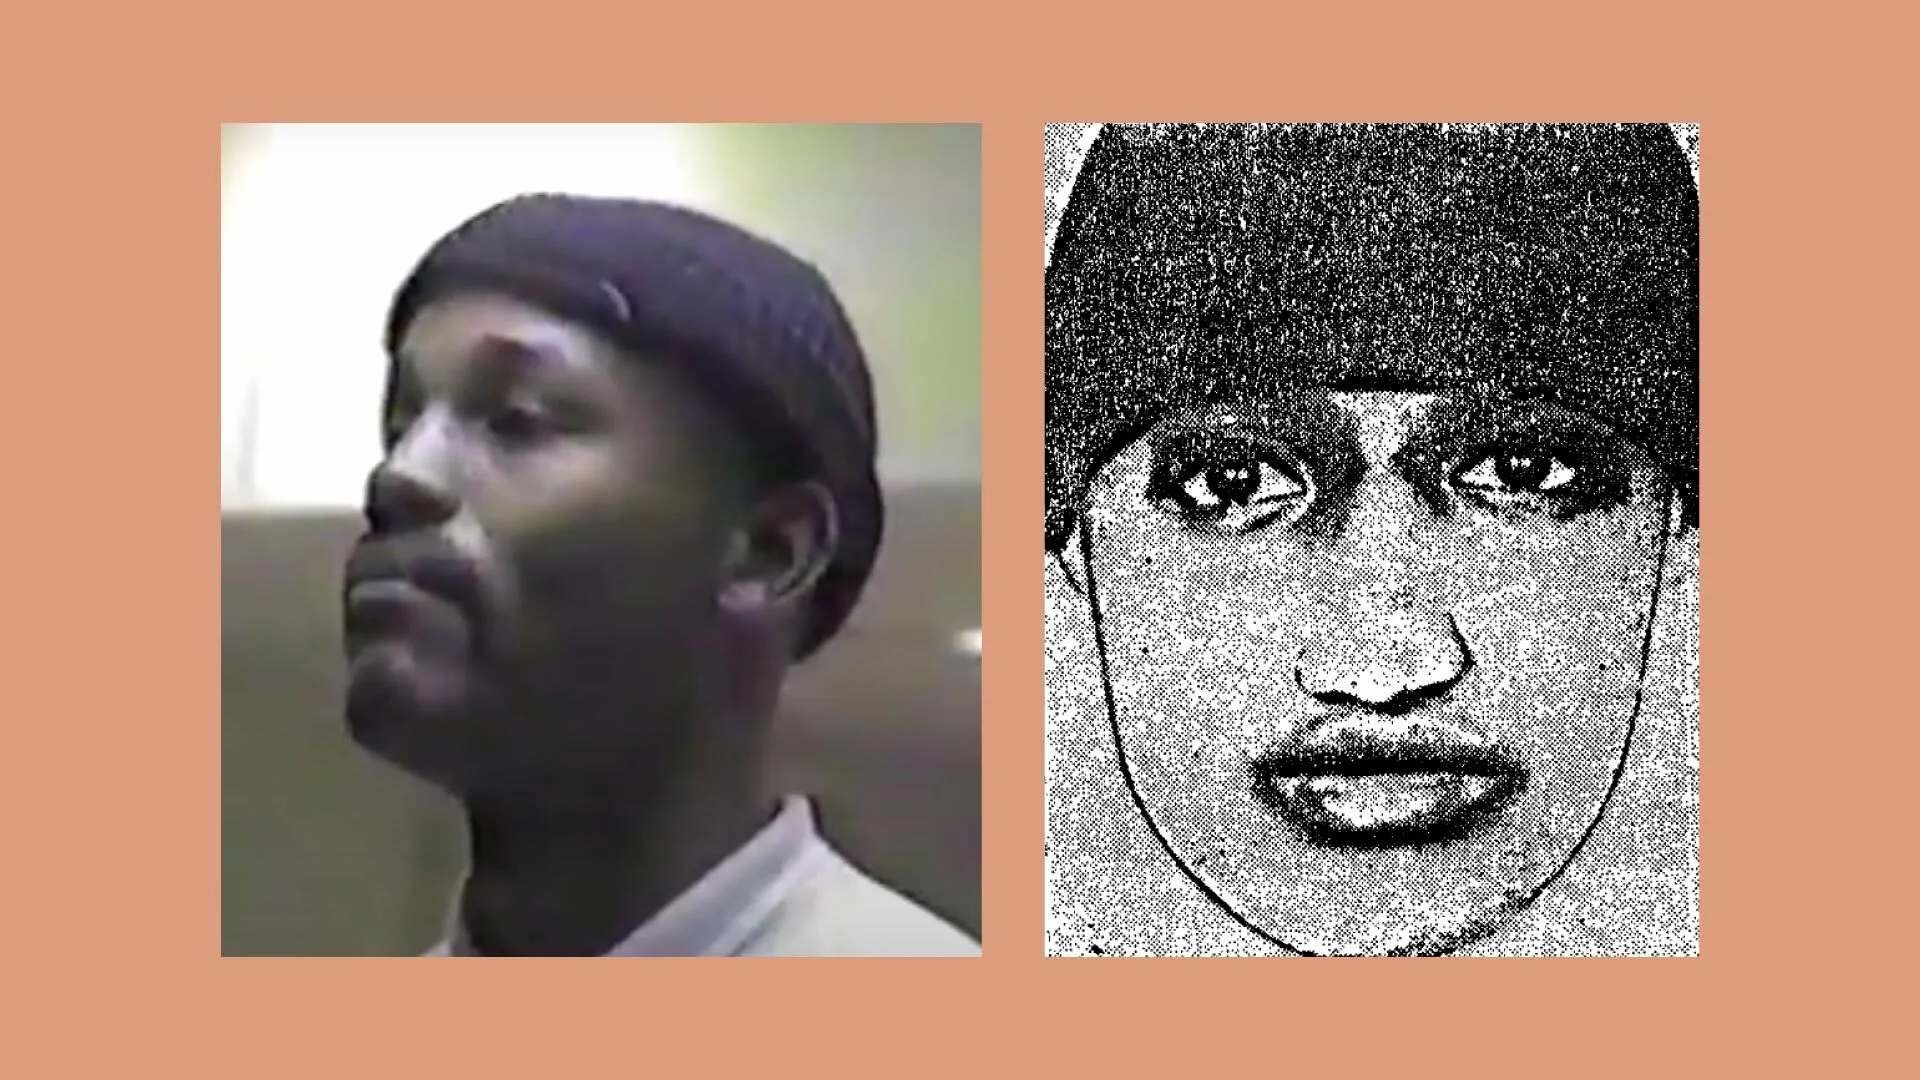 Perry Lott, with a mustache, in the photo lineup compared to the police composite sketch of the assailant, a man without a mustache. (Image: Innocence Project)